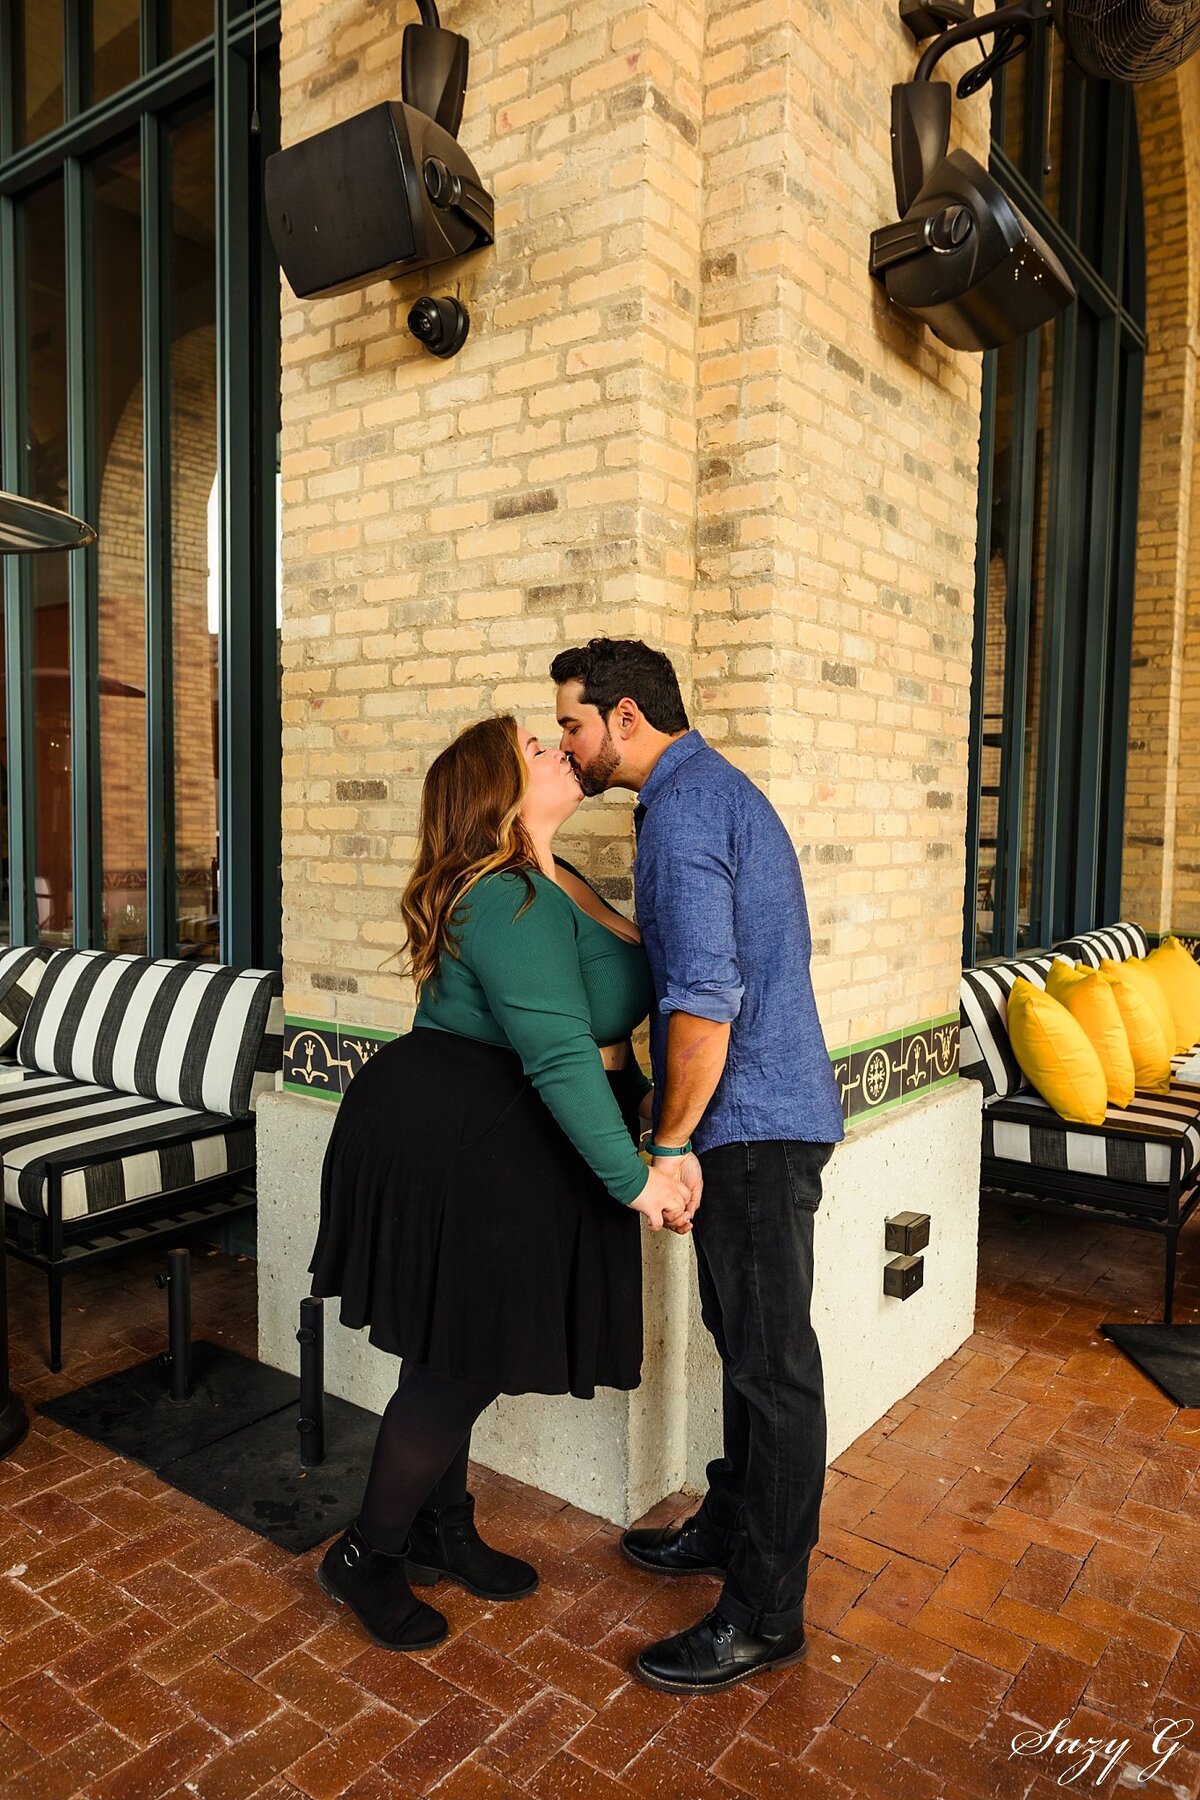 Engagements- Texas Engagement Photography - Suzy G -Suzy G Photography_0017